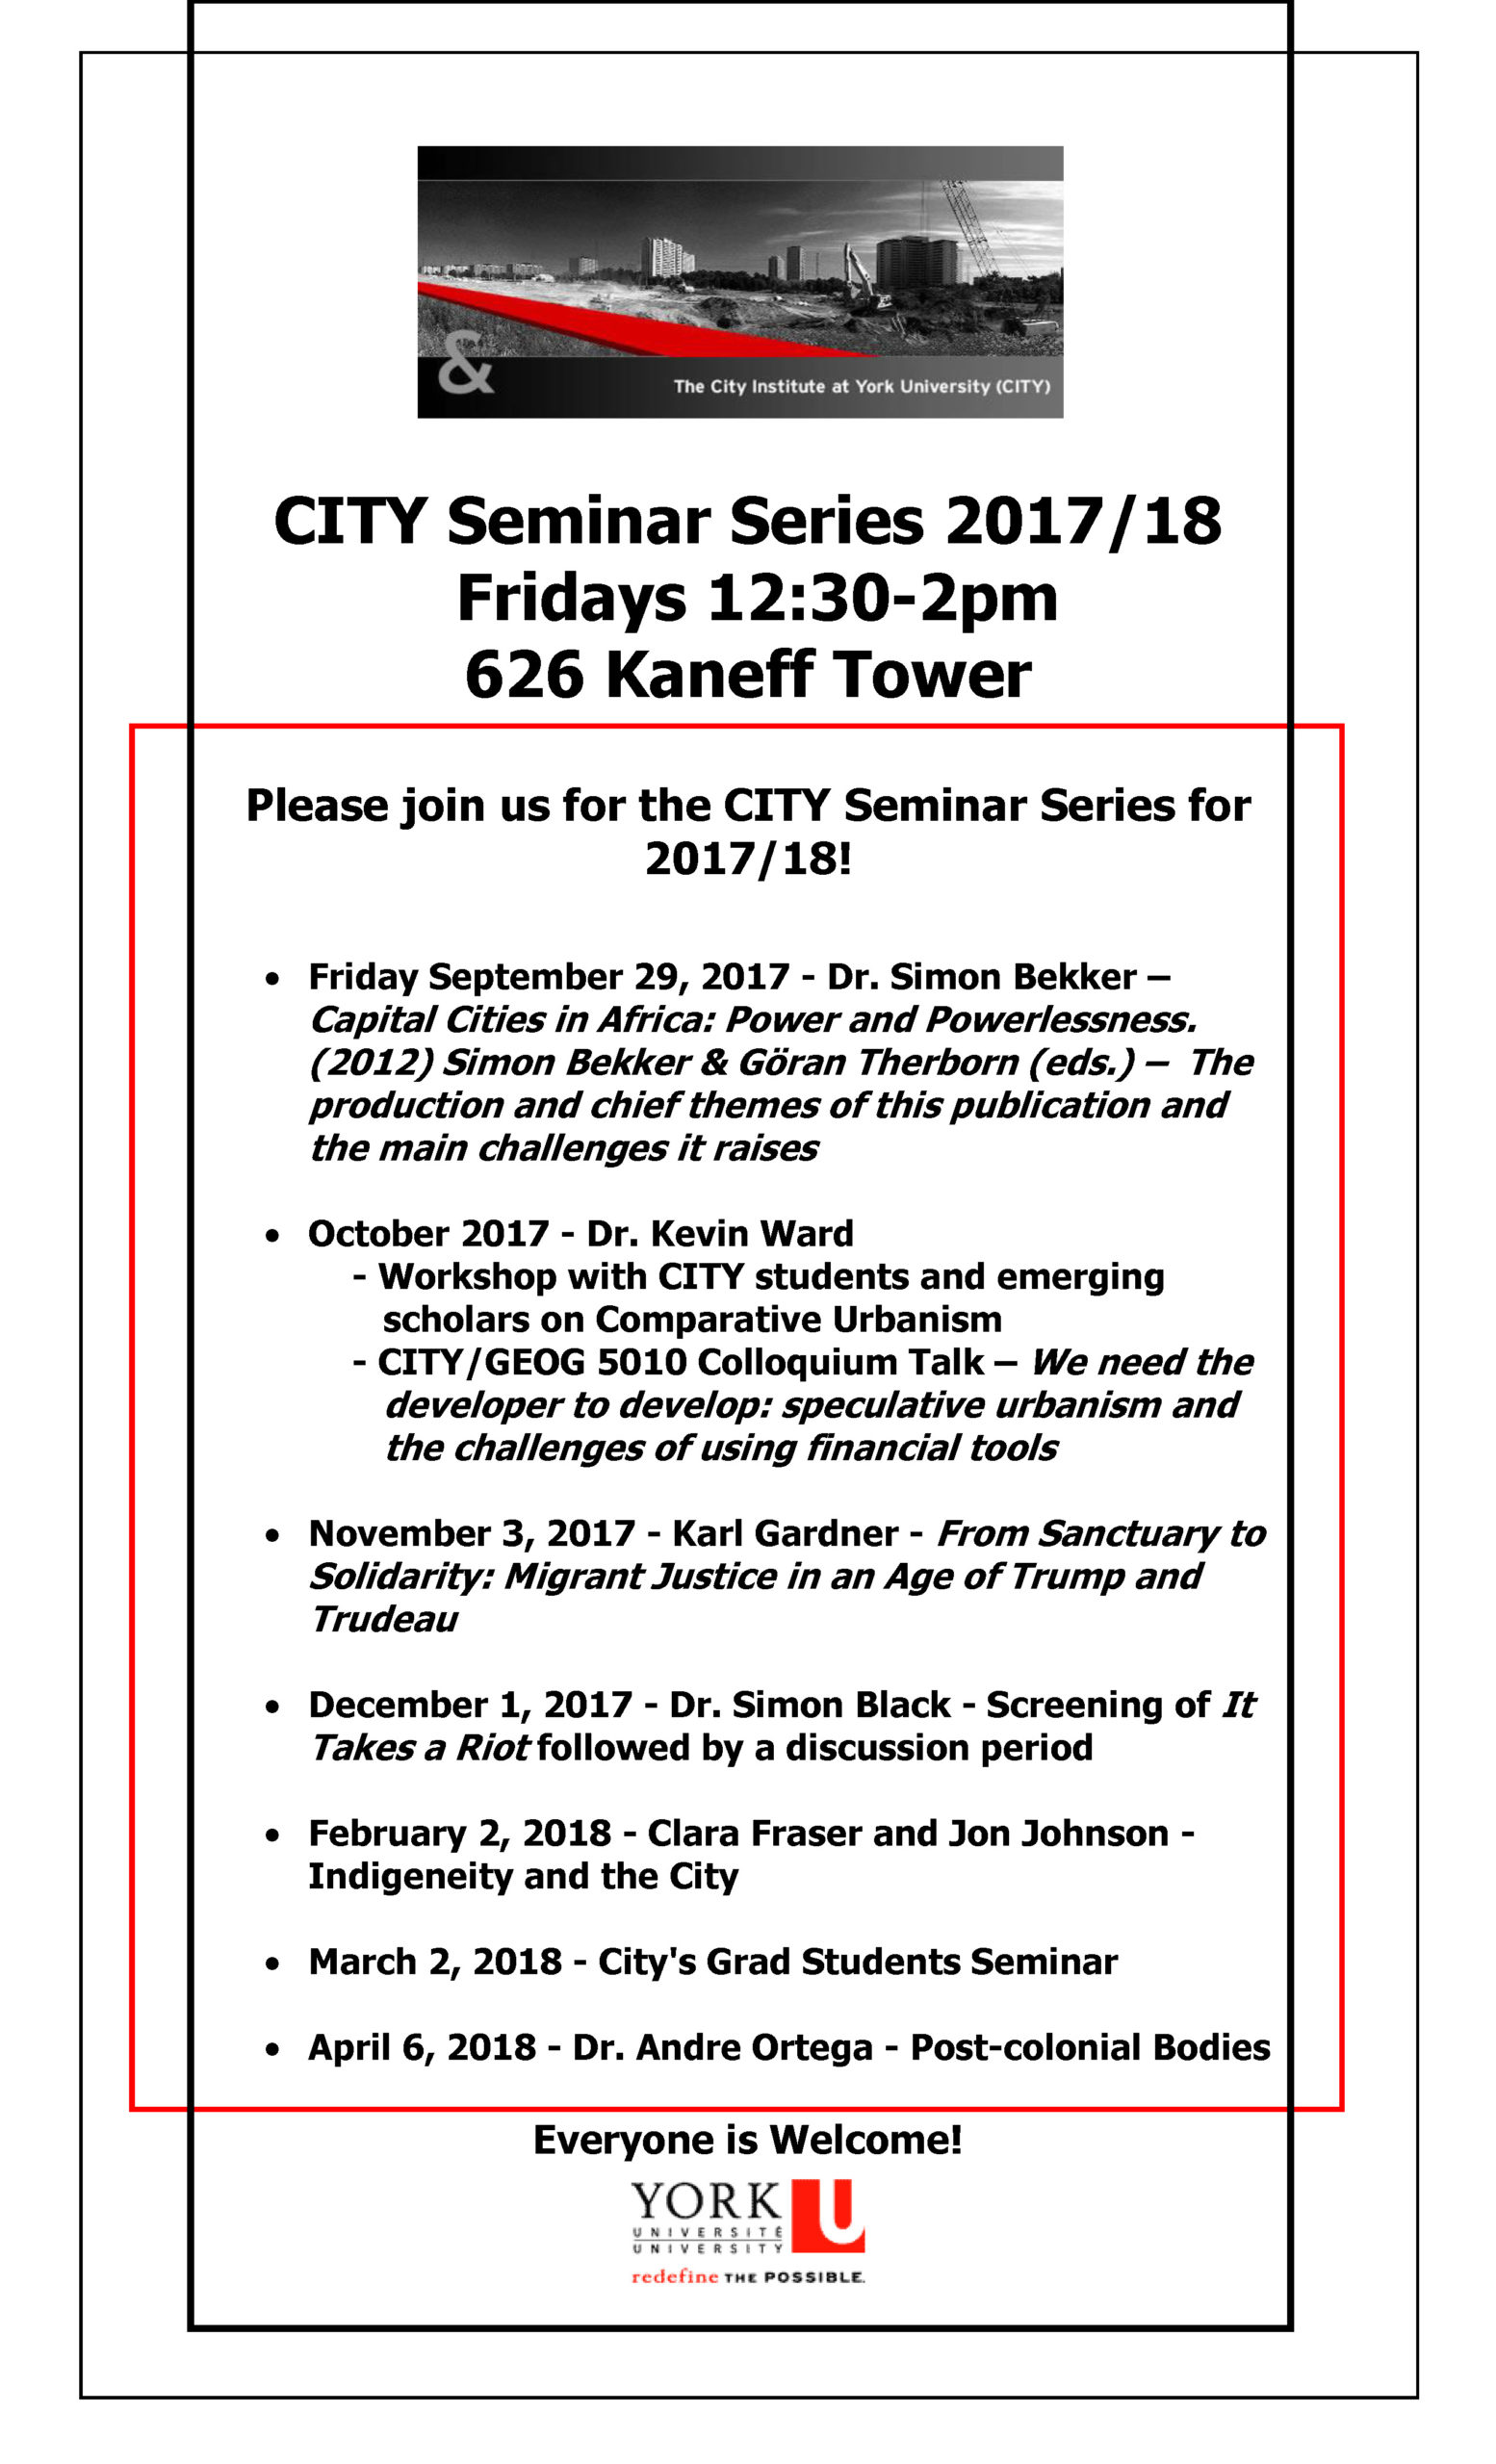 City Seminar Series with details for 2017/18